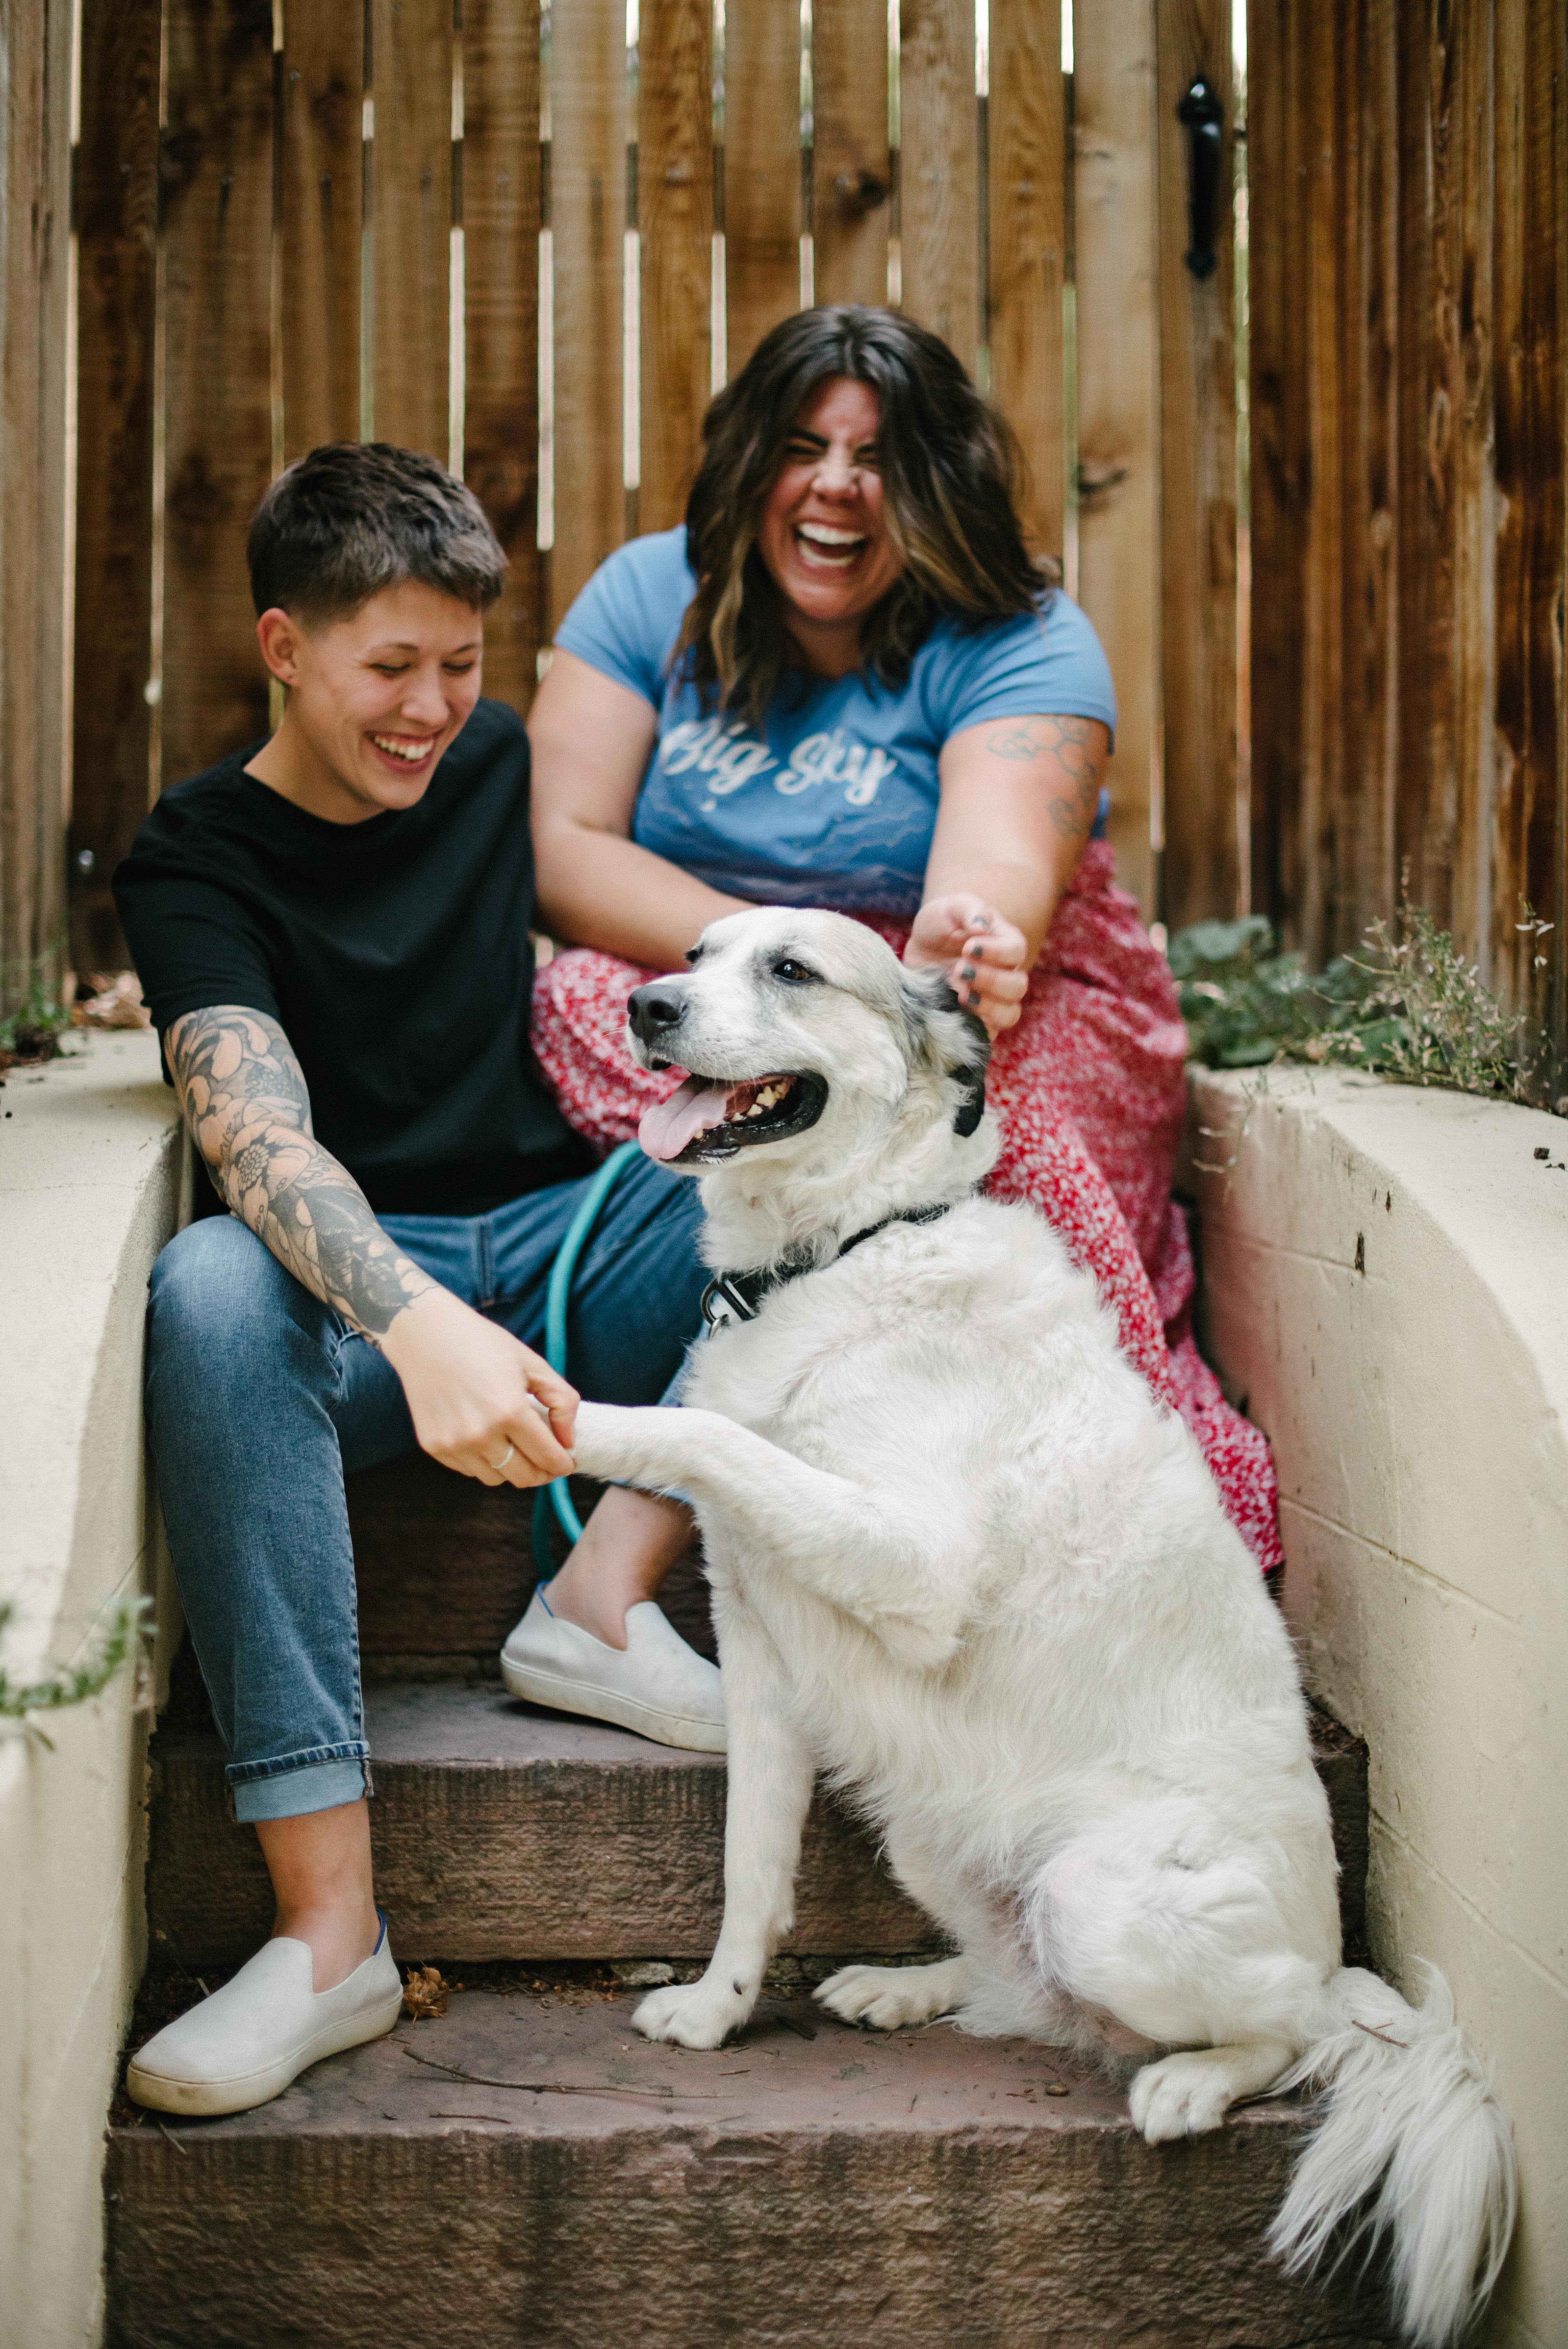 lgbtq+ photographer duo with dog posing for a picture